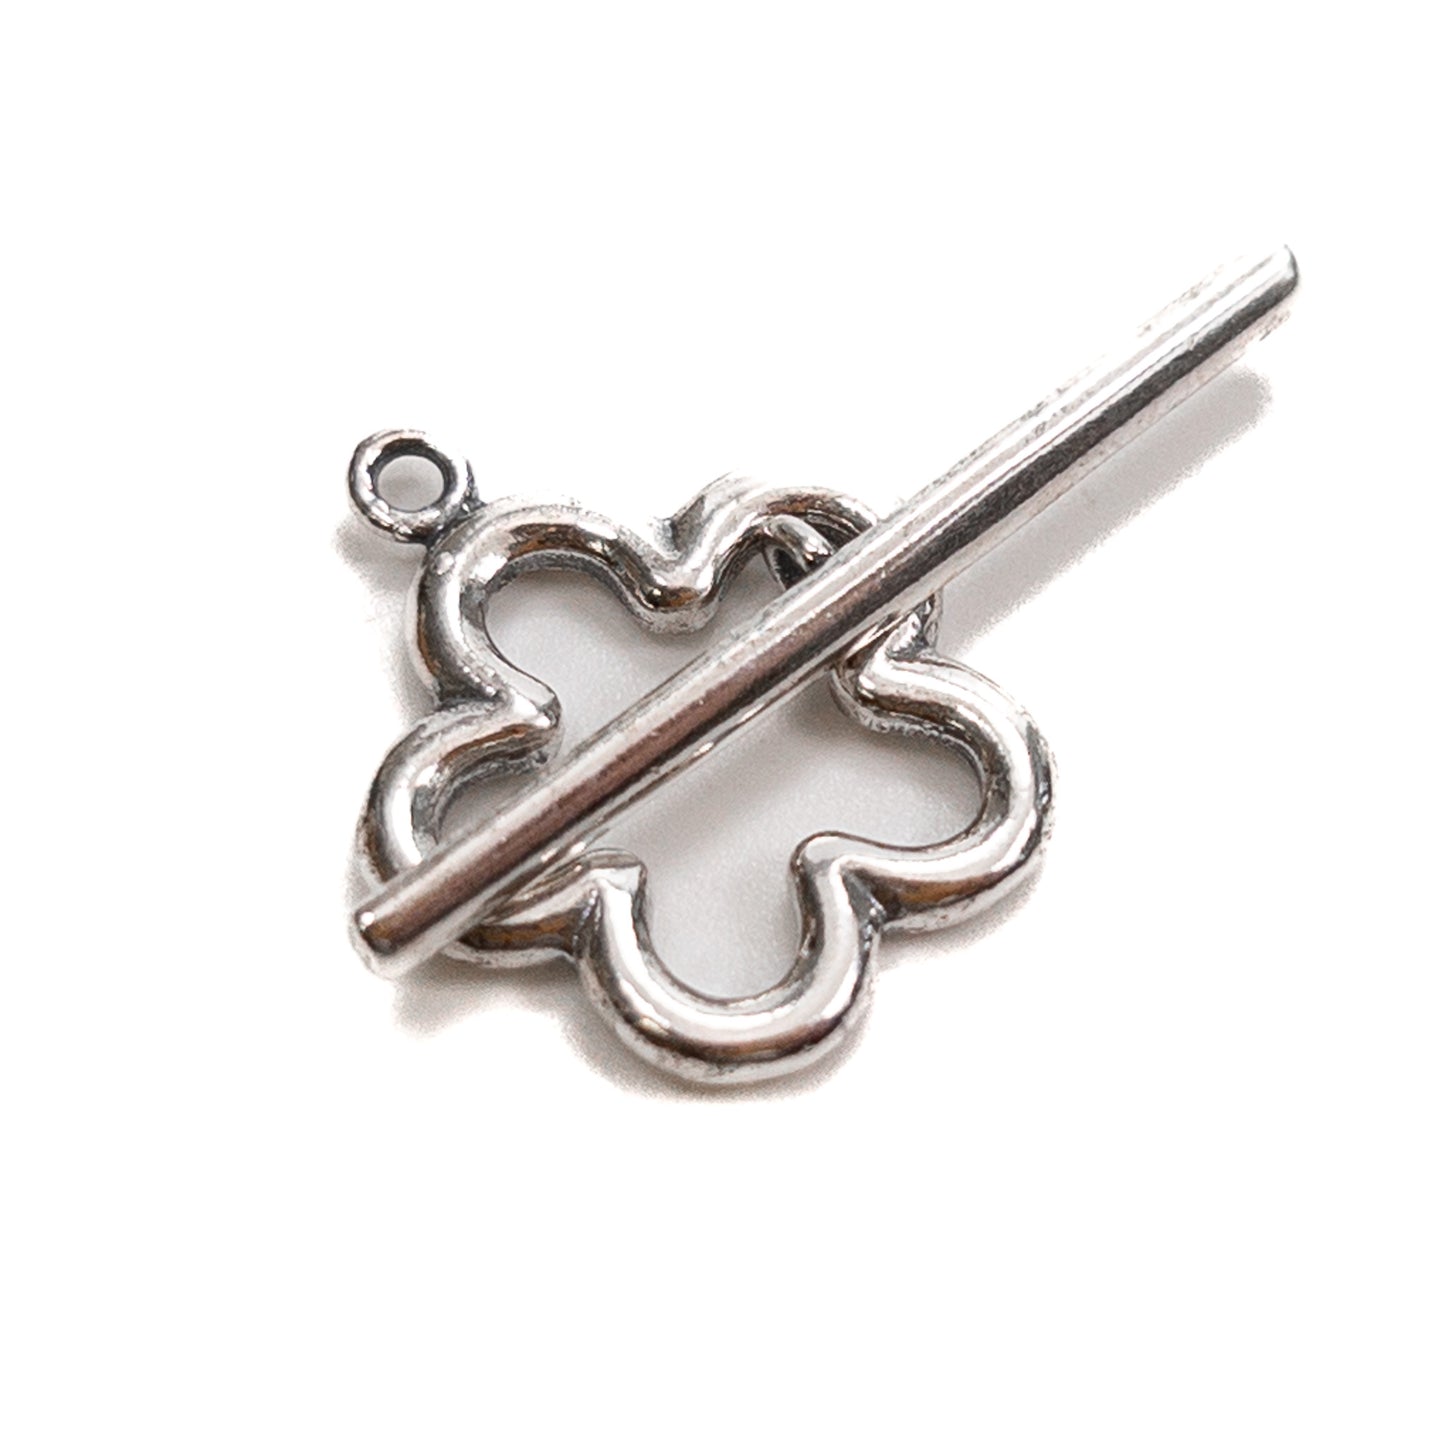 Super DaiZy Toggle (Sterling Silver) - 1 set